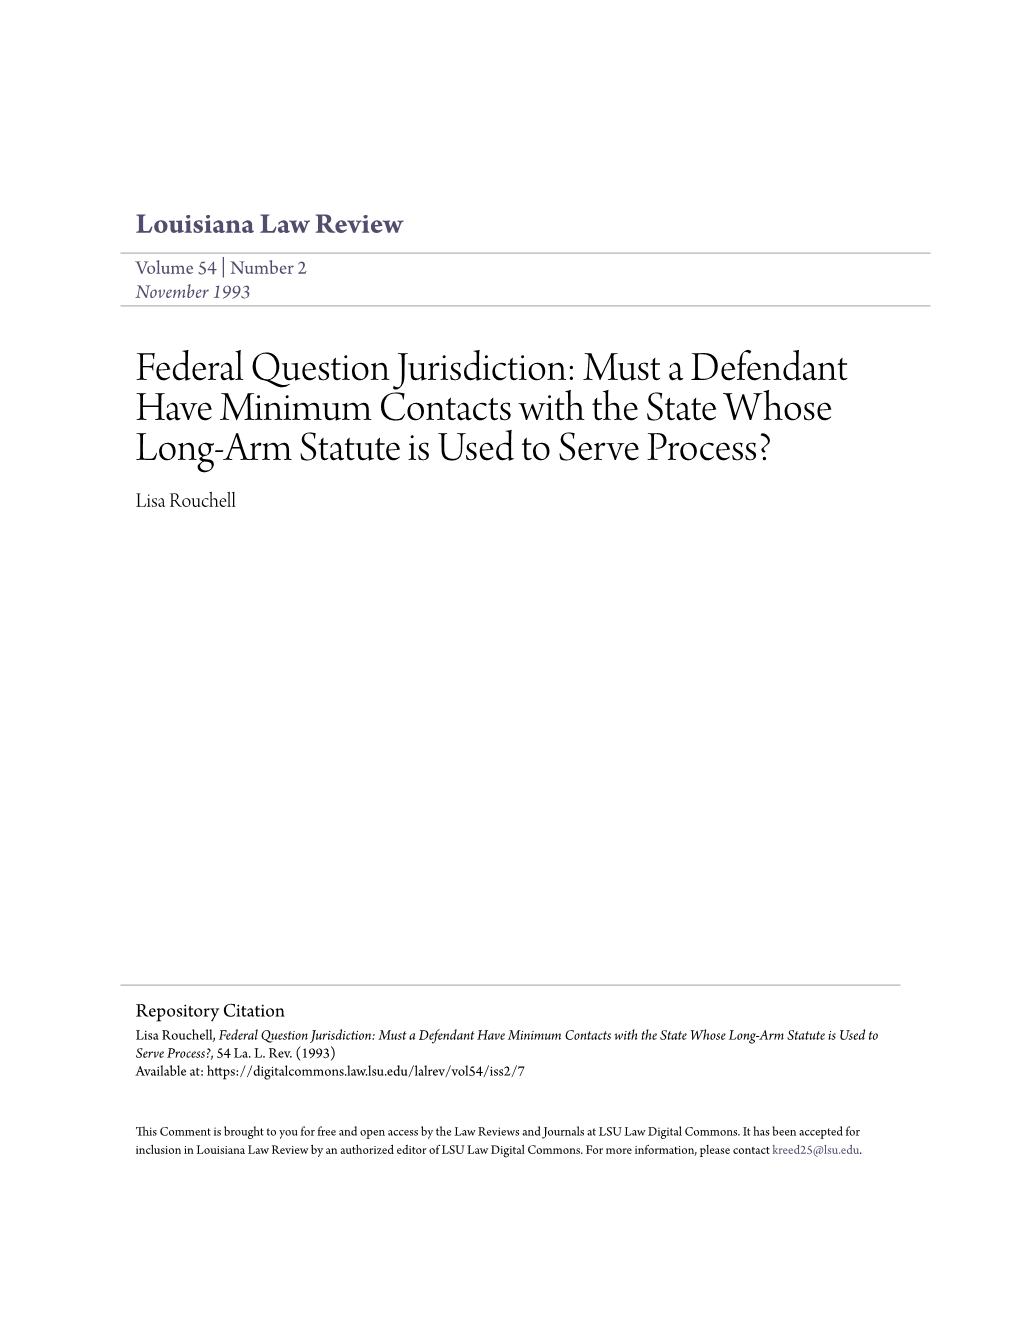 Federal Question Jurisdiction: Must a Defendant Have Minimum Contacts with the State Whose Long-Arm Statute Is Used to Serve Process? Lisa Rouchell